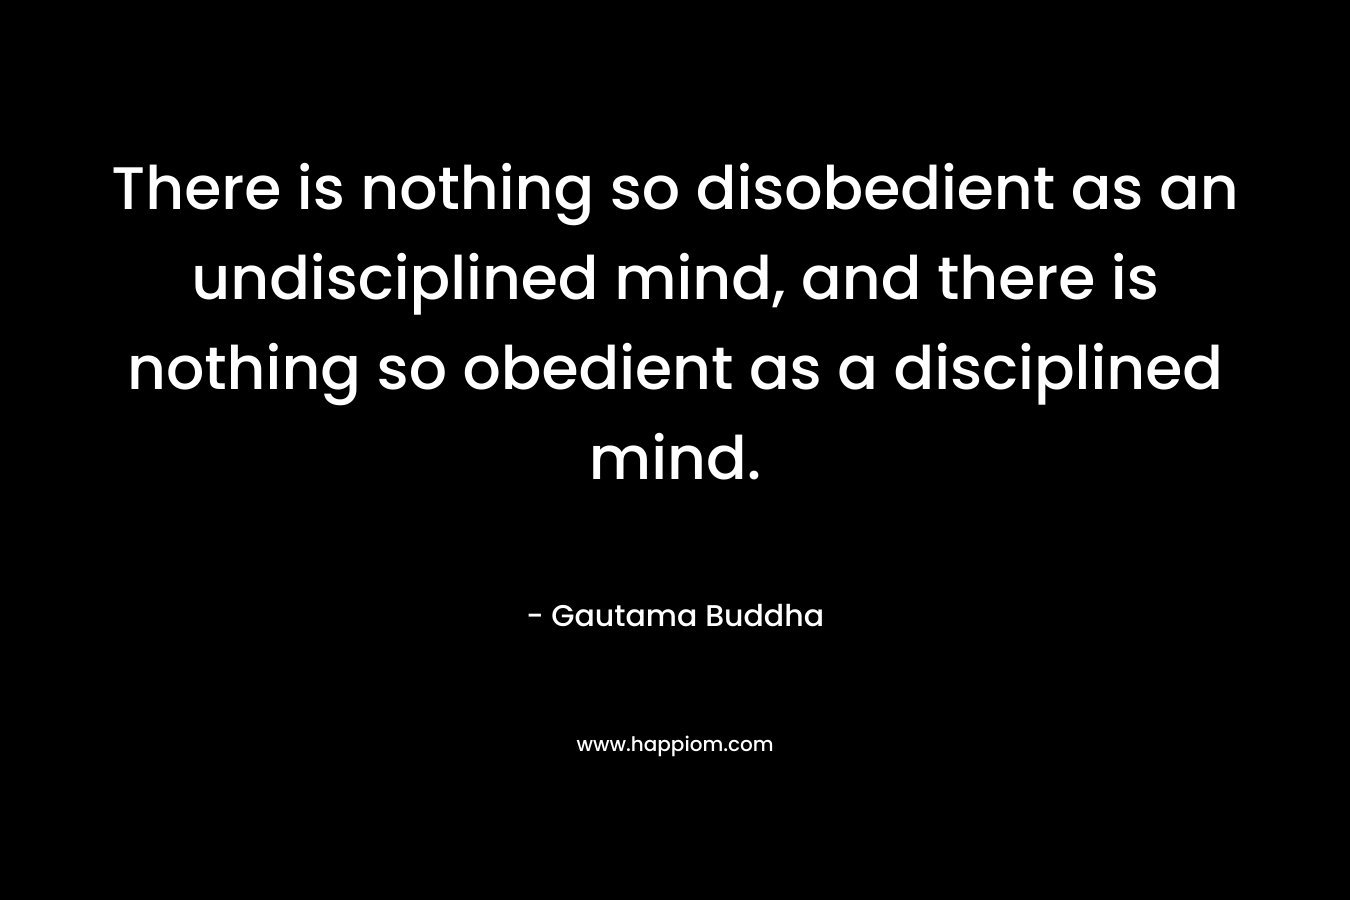 There is nothing so disobedient as an undisciplined mind, and there is nothing so obedient as a disciplined mind. – Gautama Buddha